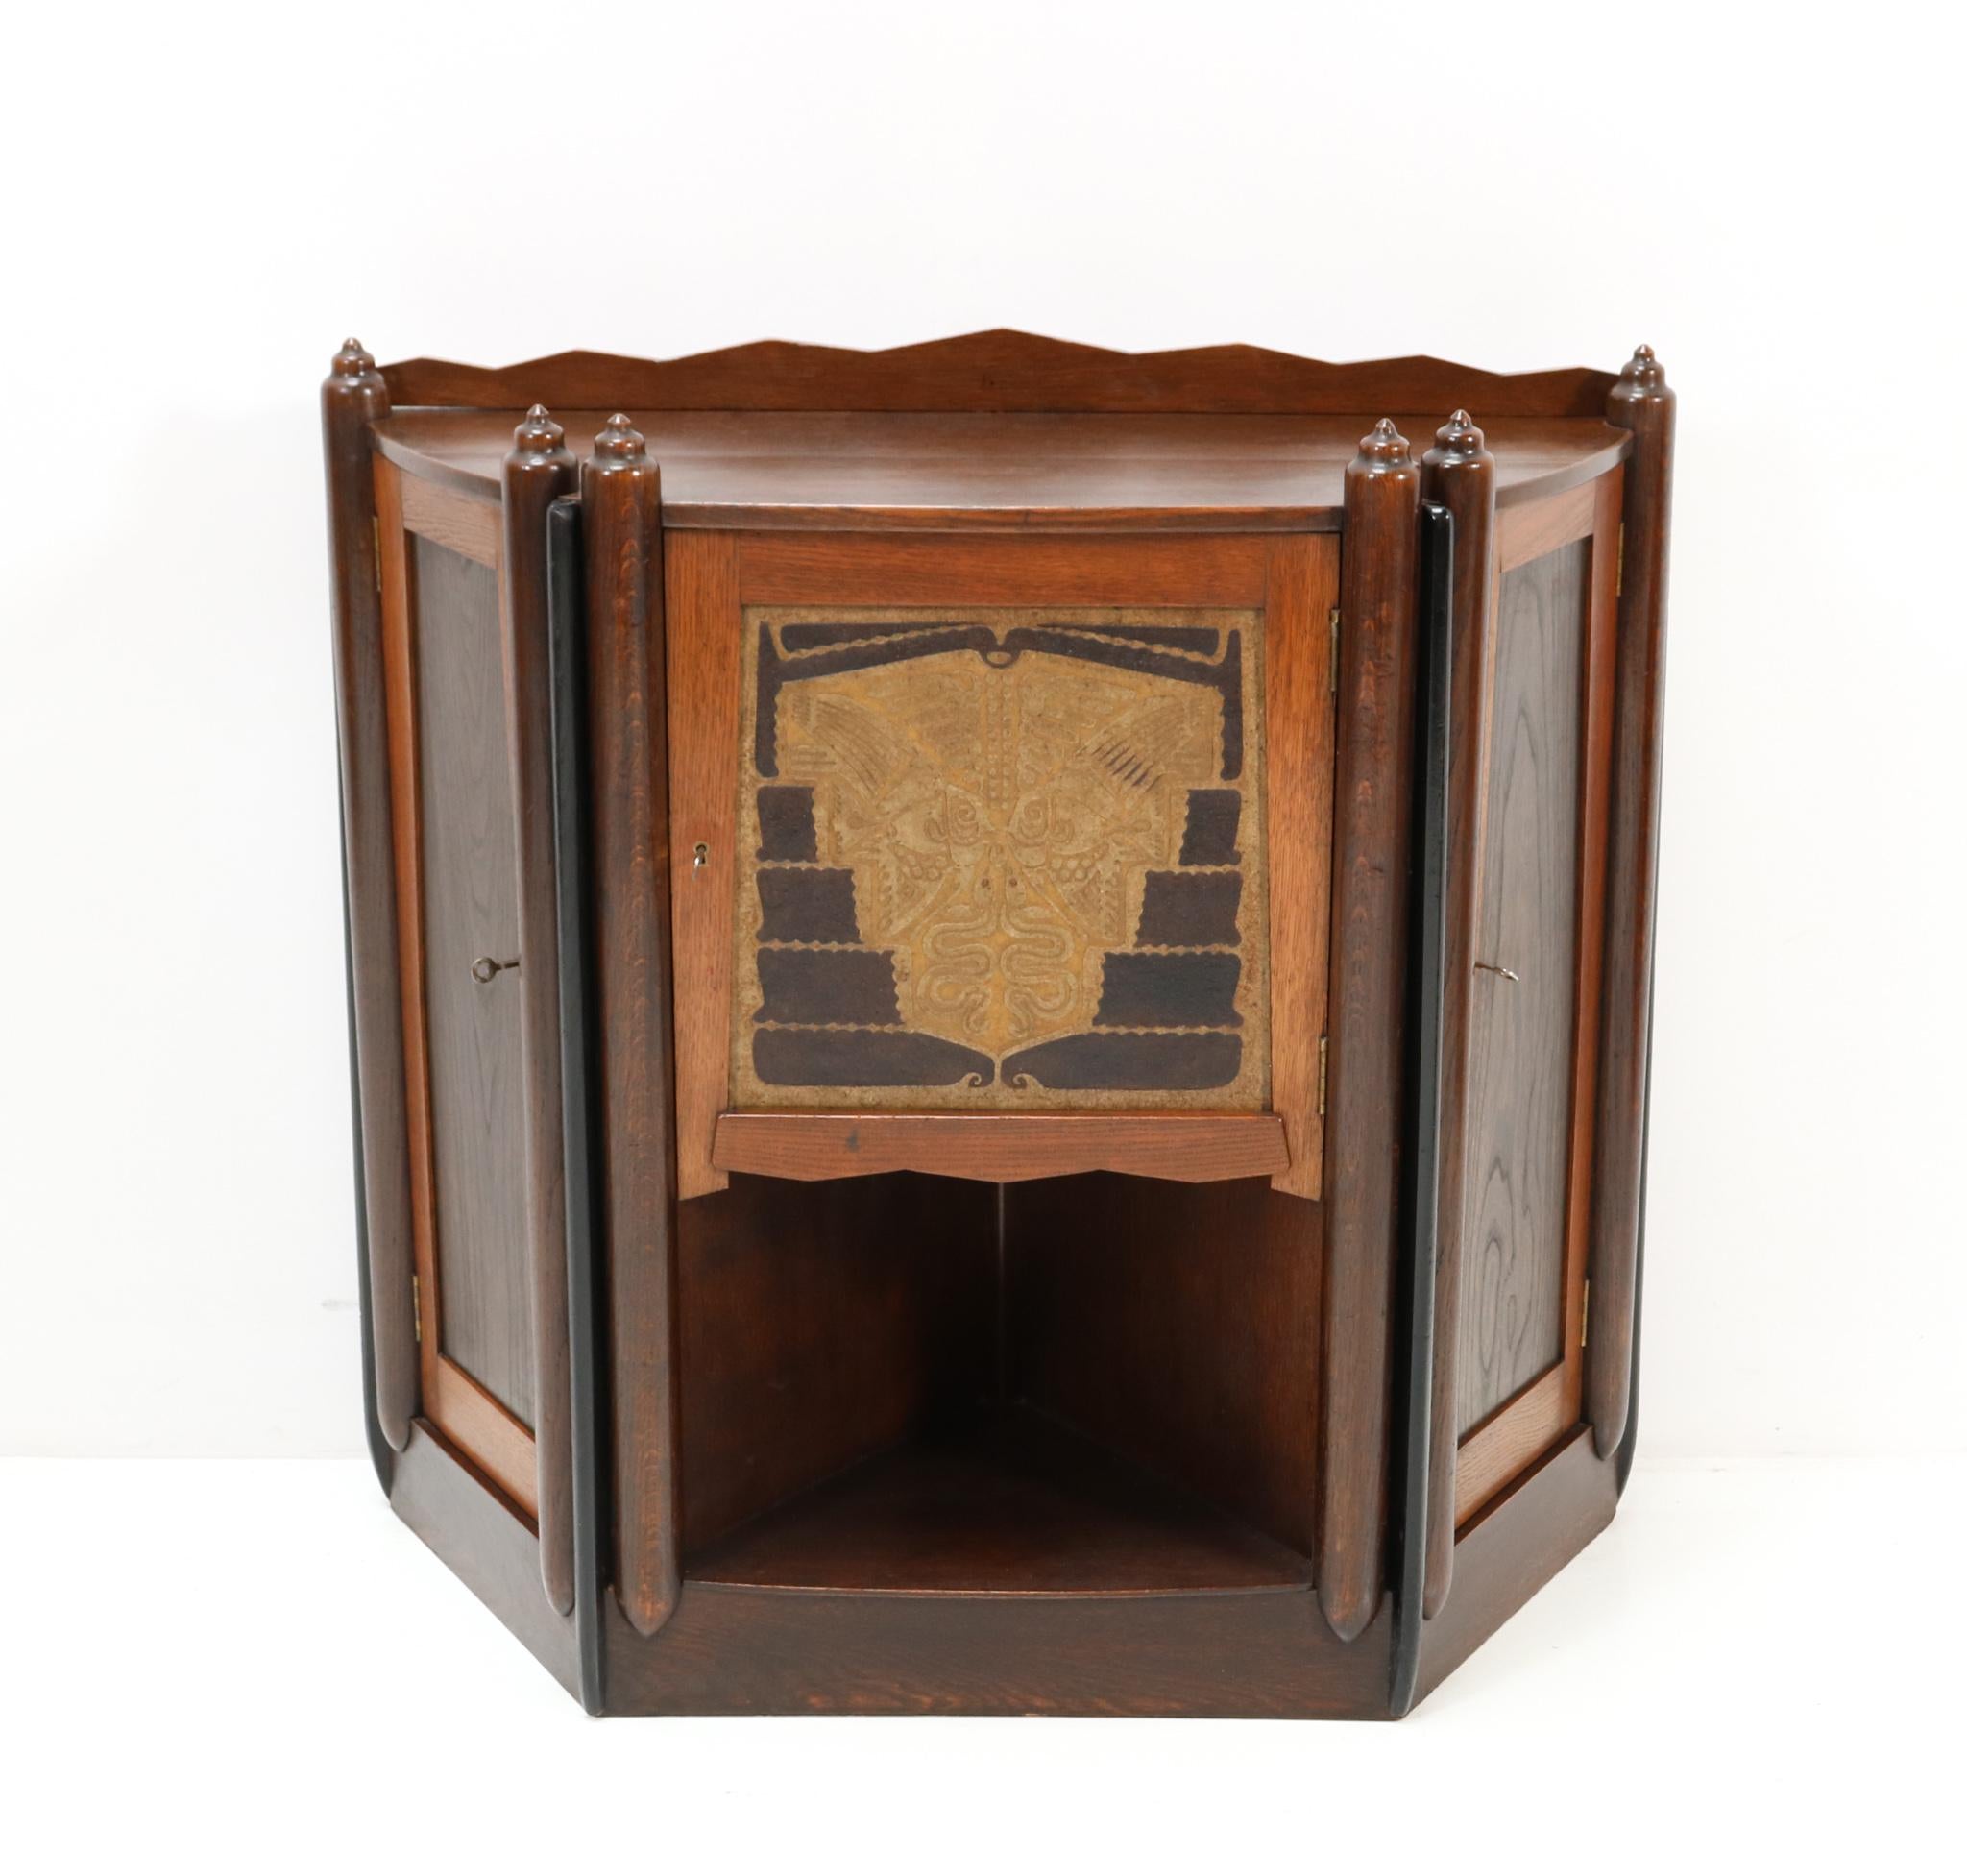 Magnificent and ultra rare Art Deco Amsterdamse School cabinet. Design by Christiaan Bartels. Striking Dutch design from the 1920s. Solid oak frame with solid elm panels on the side doors. The middle door has a hand-carved and hand-painted panel